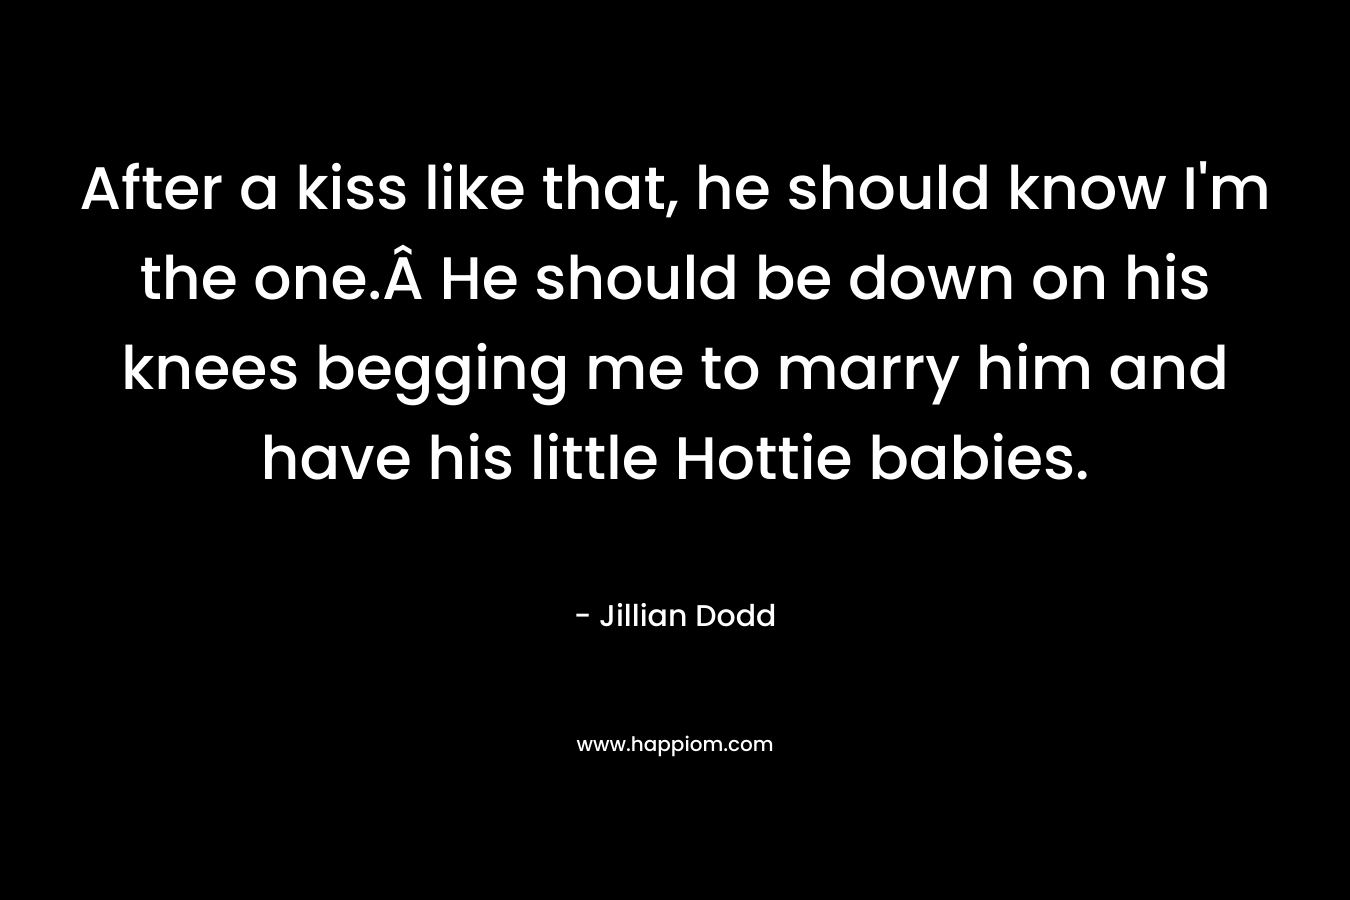 After a kiss like that, he should know I’m the one.Â He should be down on his knees begging me to marry him and have his little Hottie babies. – Jillian Dodd